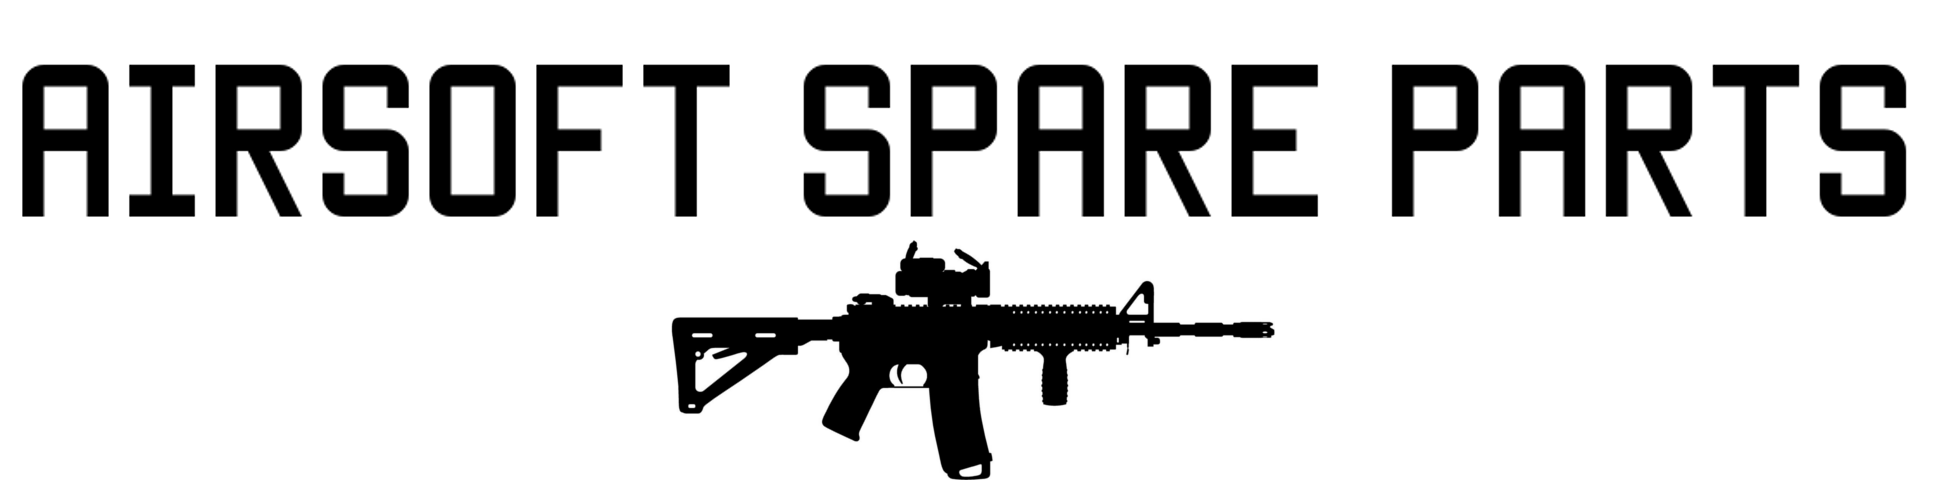 Airsoft Spare Parts